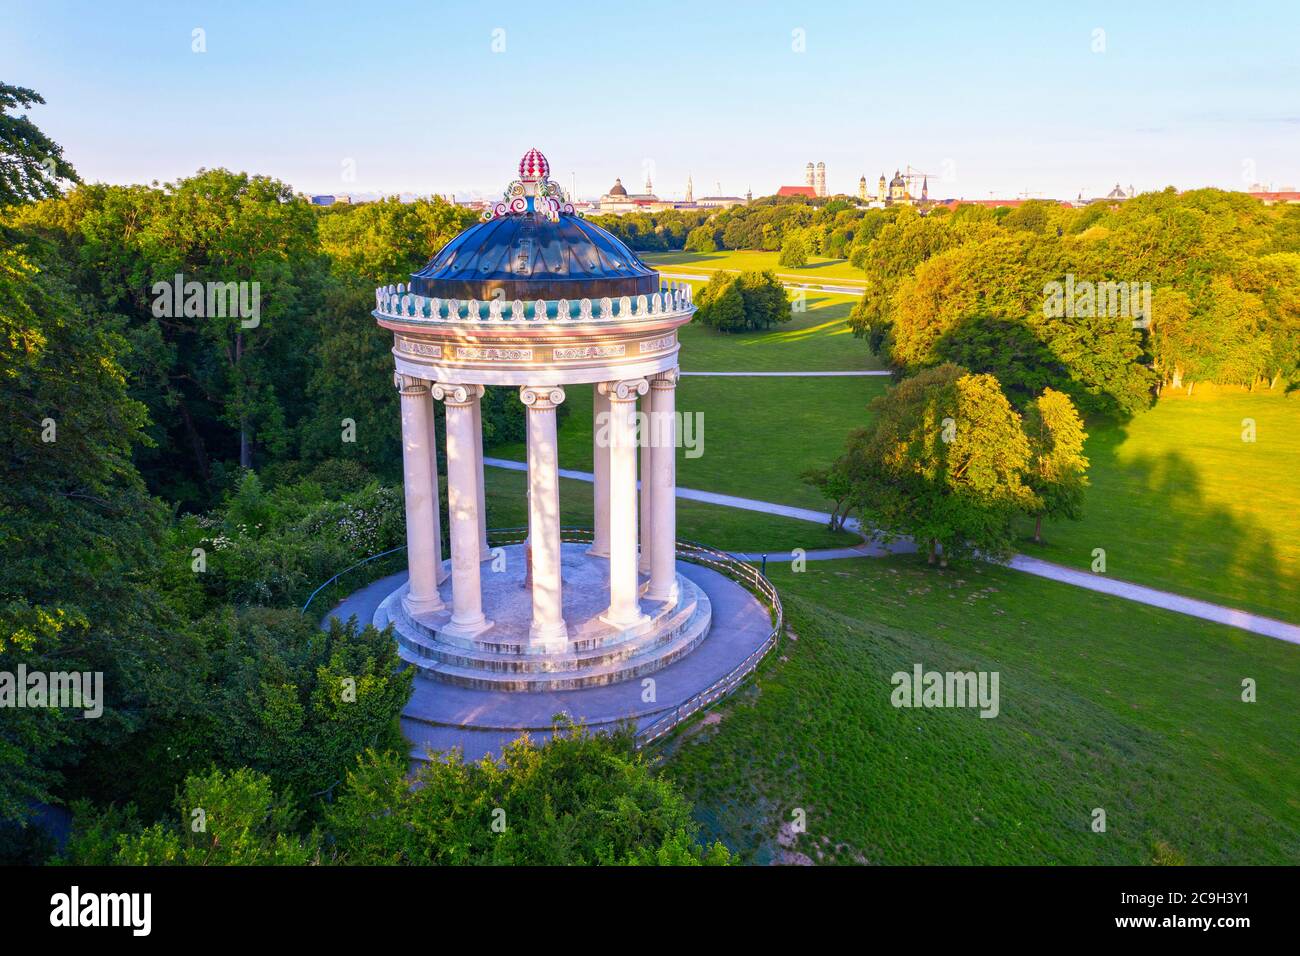 Monopteros in the English Garden, view over the old town, Munich, aerial view, Upper Bavaria, Bavaria, Germany Stock Photo